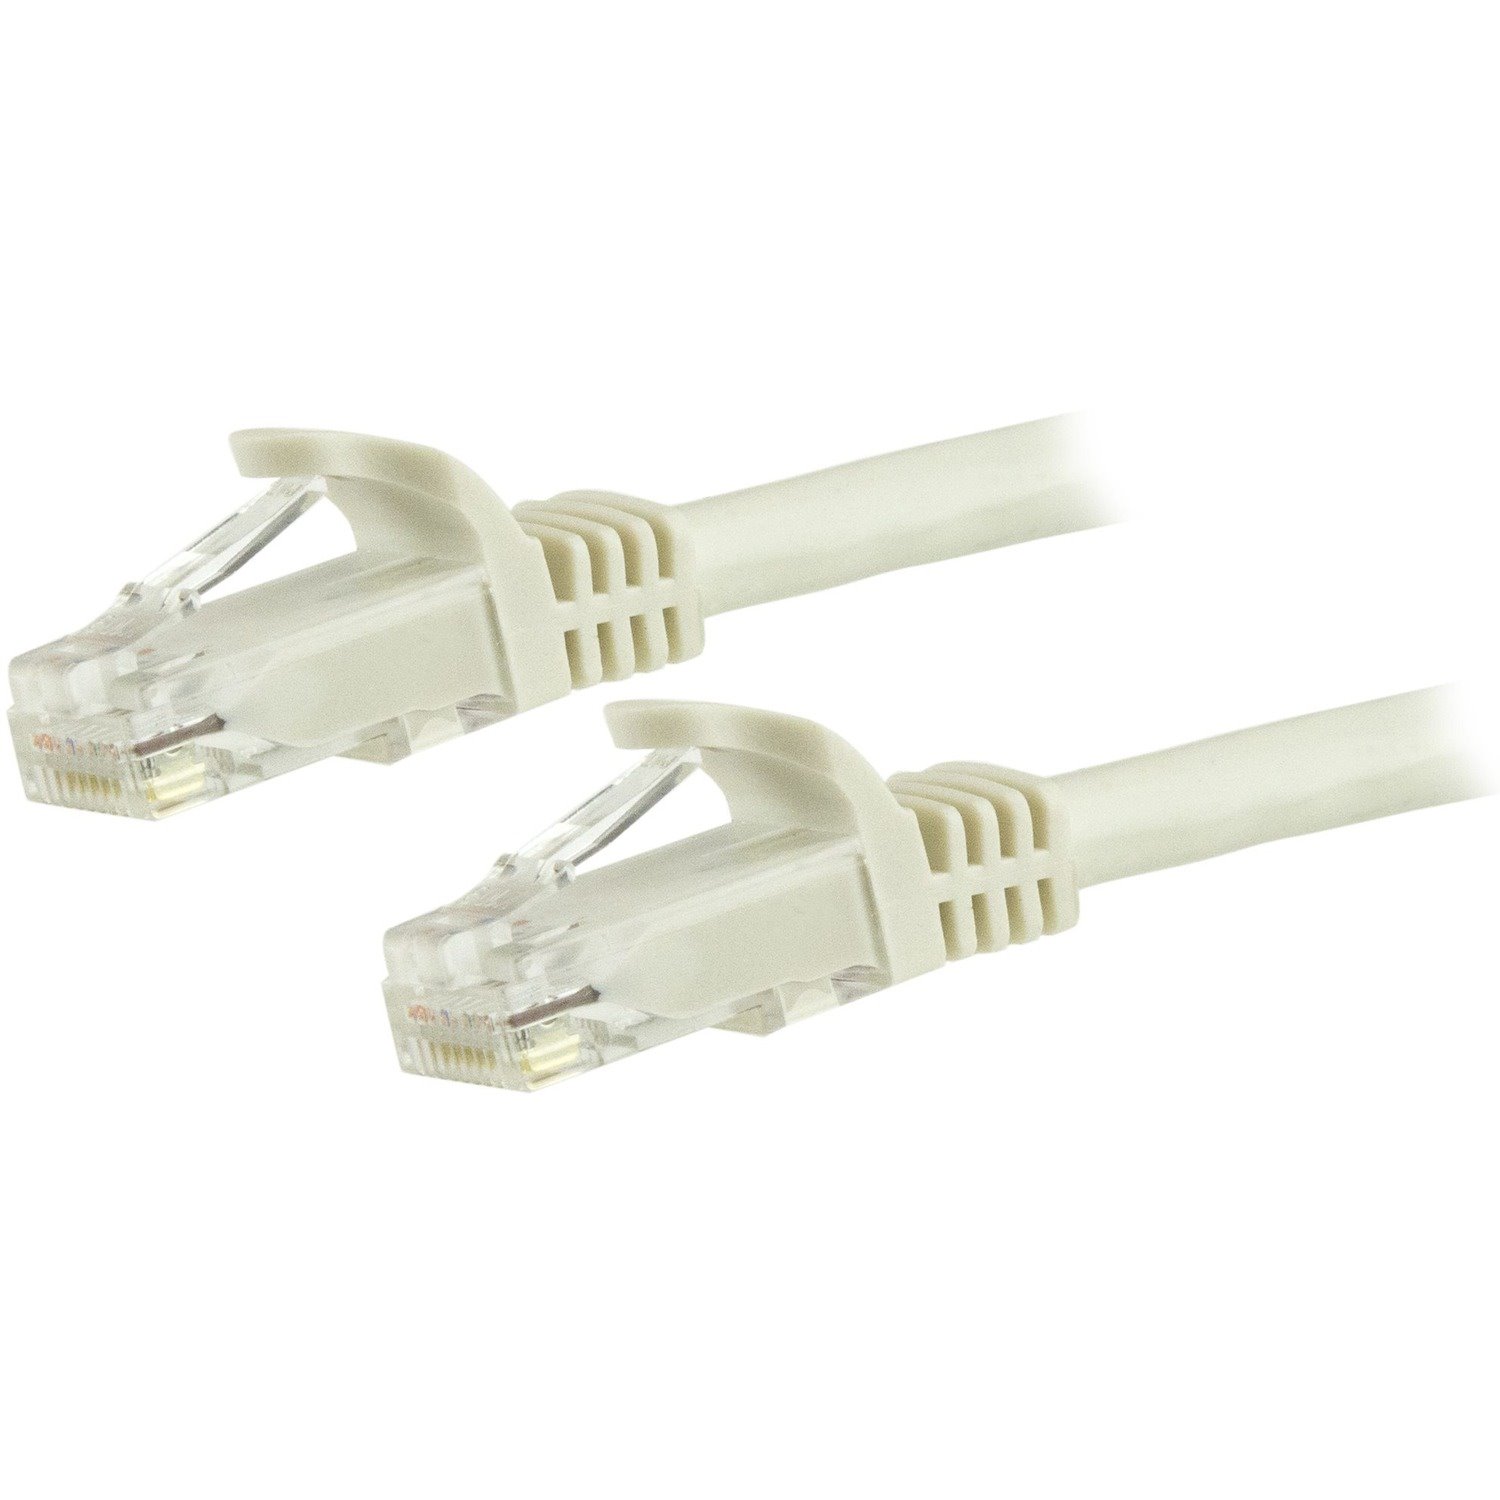 StarTech.com 15m CAT6 Ethernet Cable - White Snagless Gigabit - 100W PoE UTP 650MHz Category 6 Patch Cord UL Certified Wiring/TIA